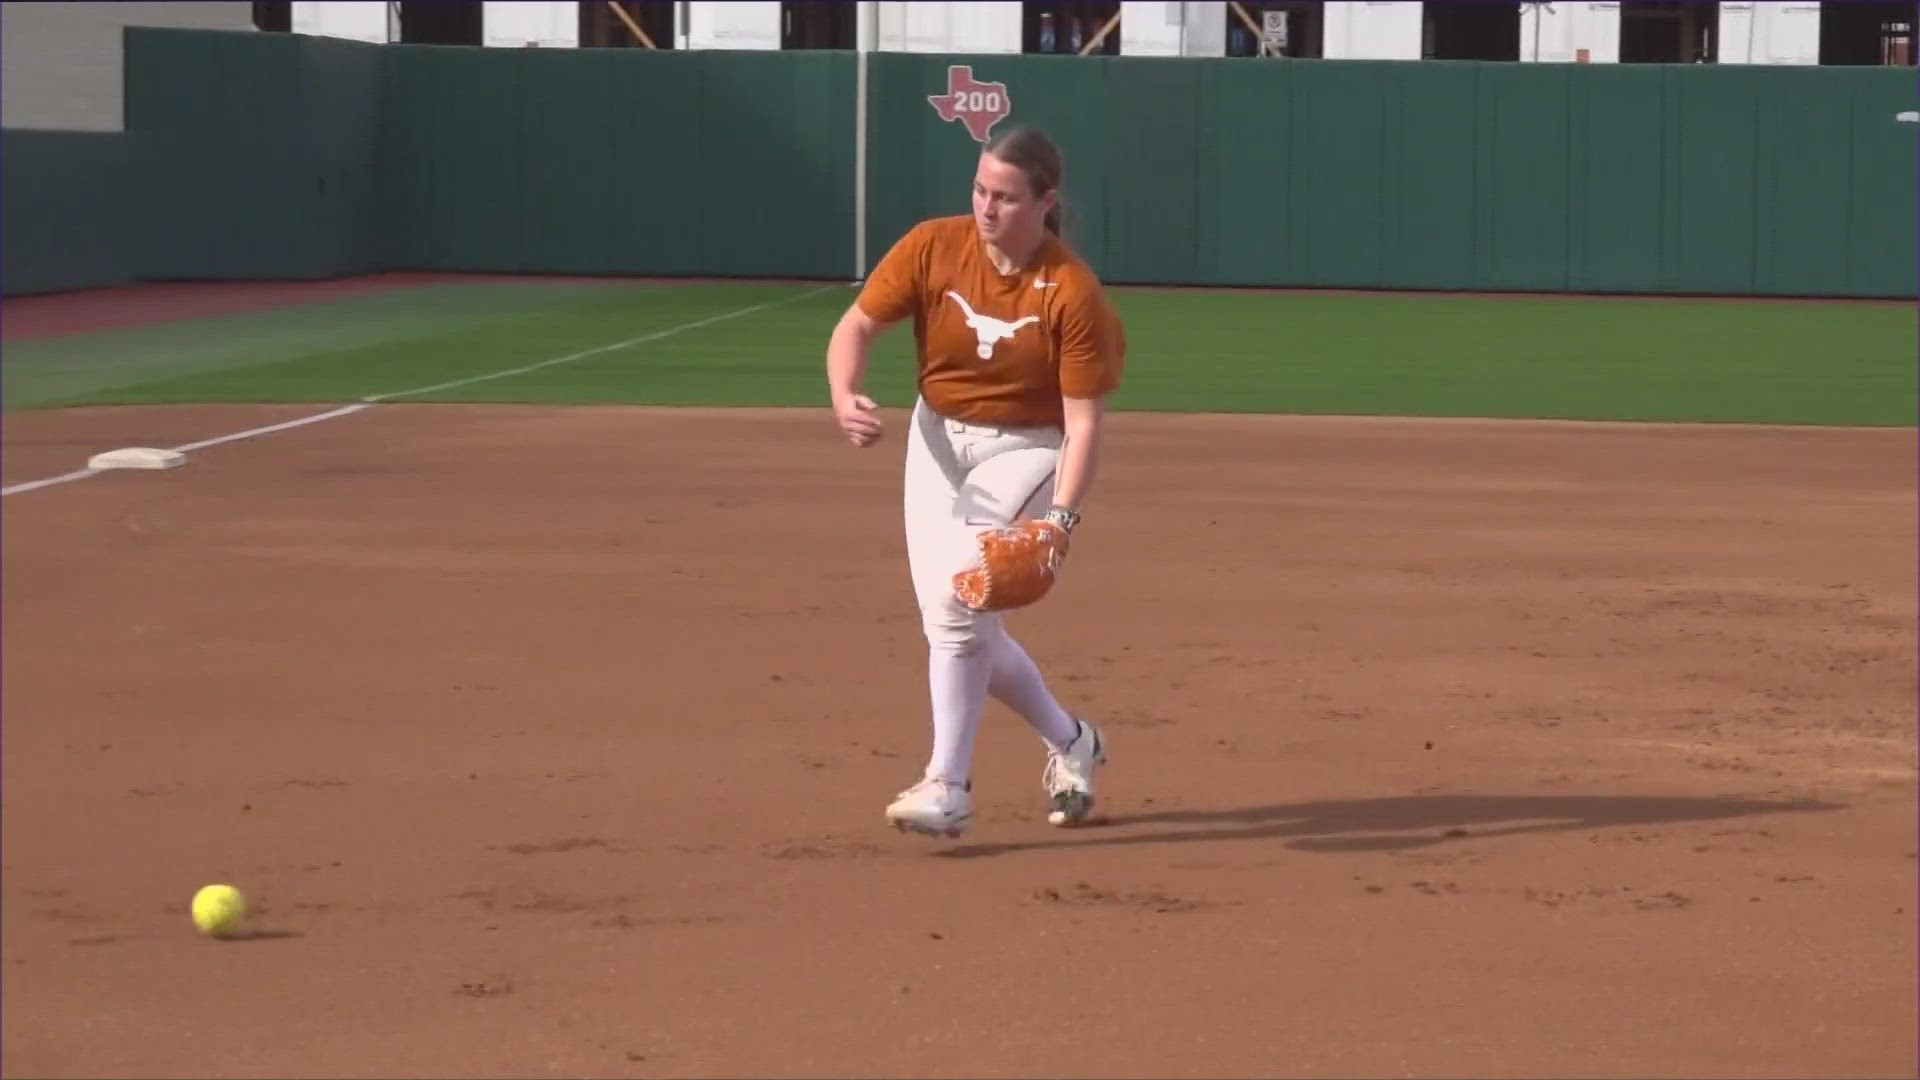 The Longhorns softball team will go to Knoxville as underdogs, but believe experience will be their benefactor.